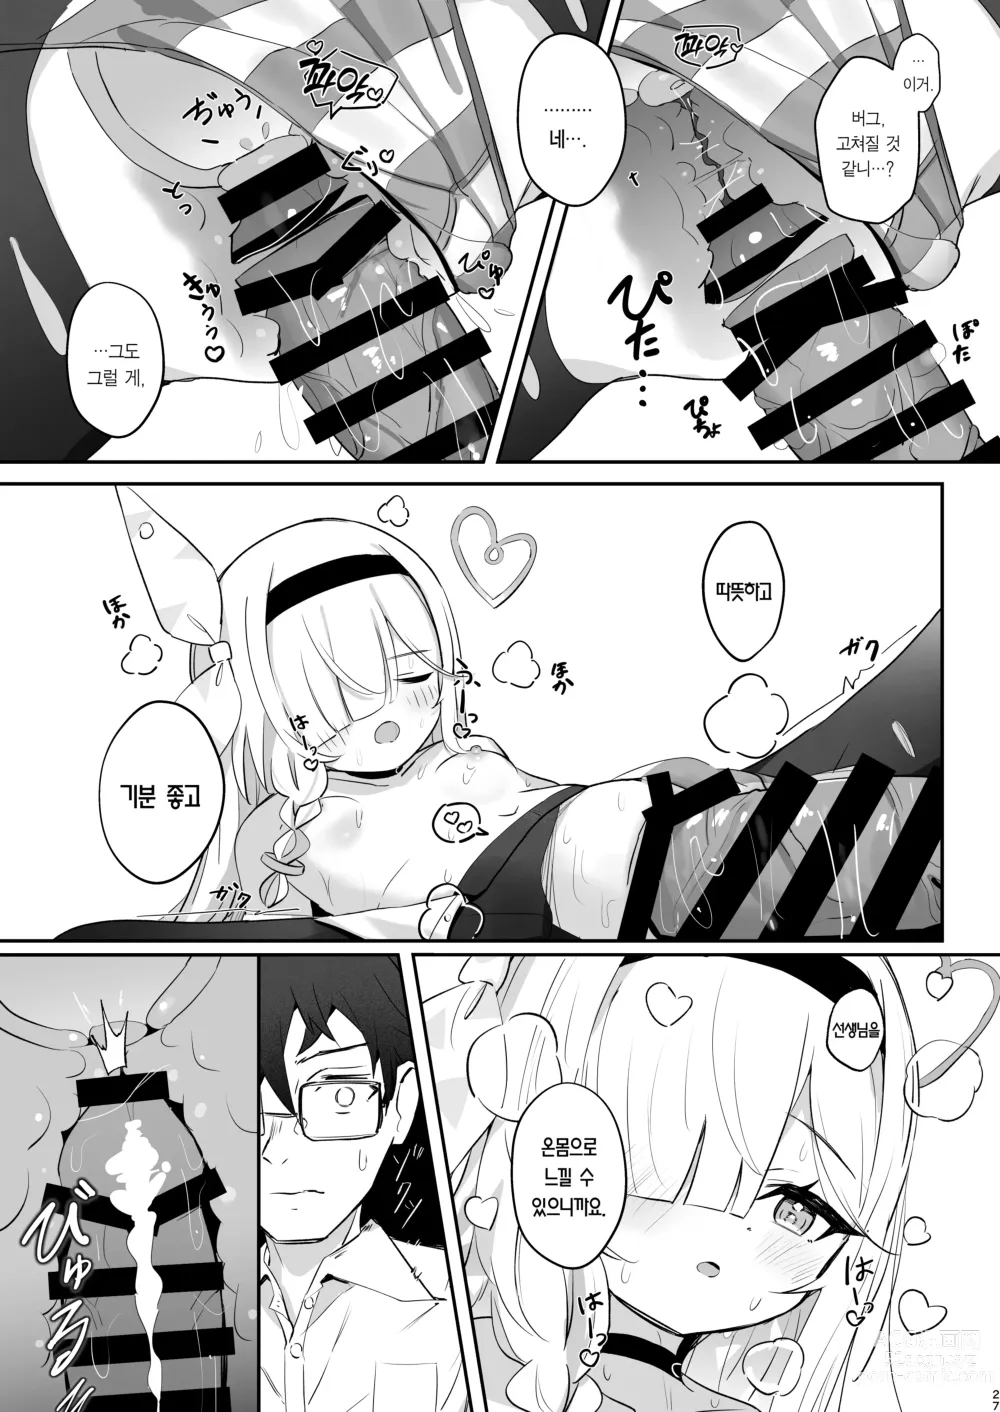 Page 26 of doujinshi 이 따스함을 알아버렸어